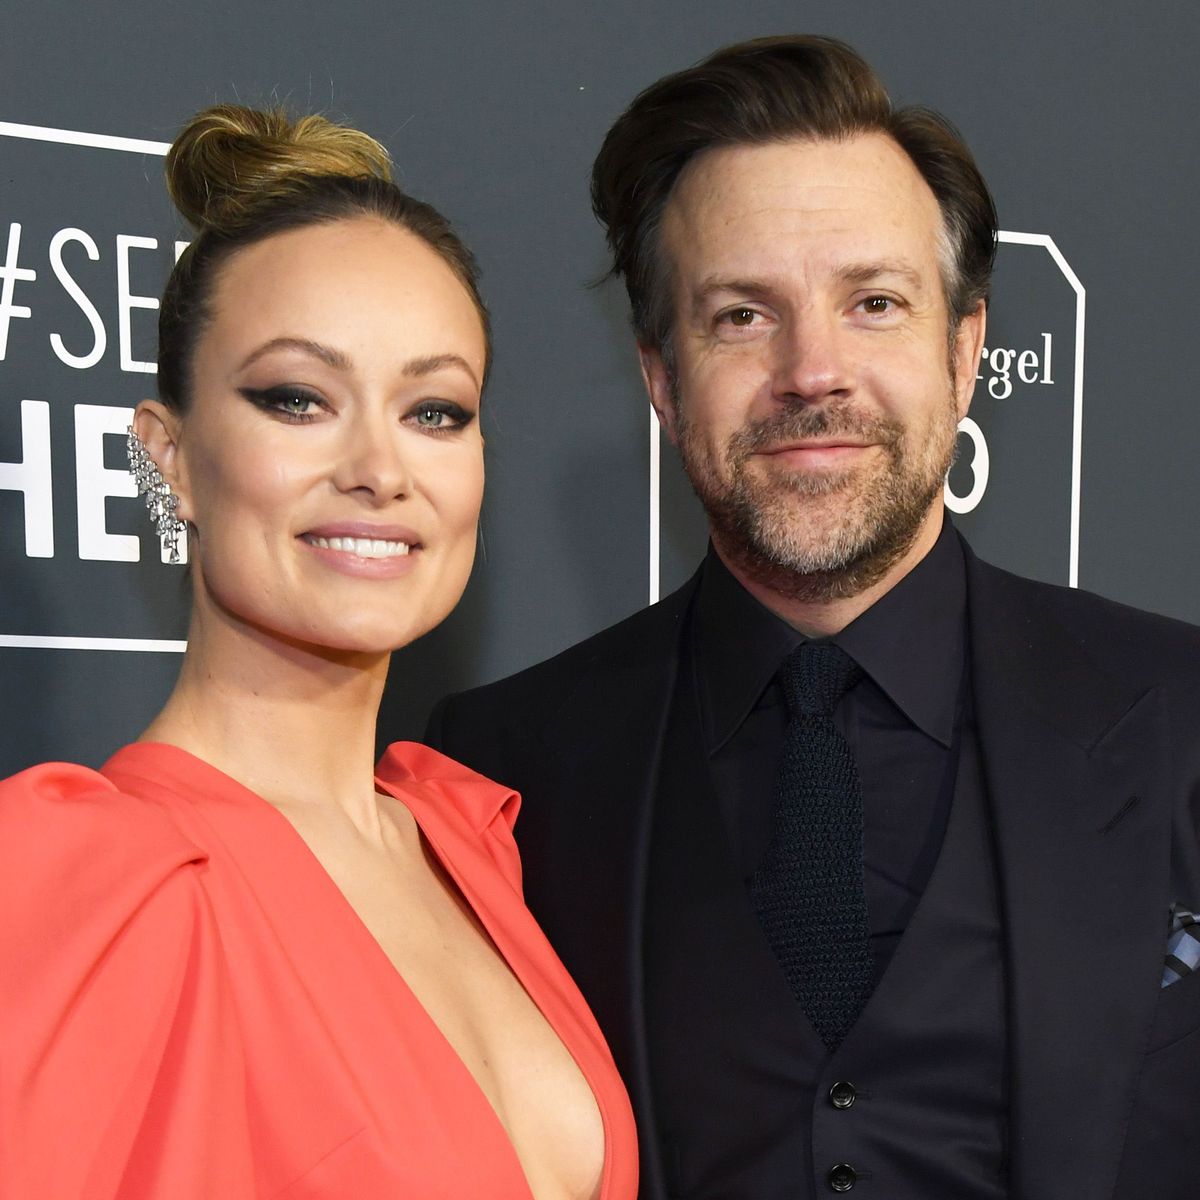 Is Jason Sudeikis mocking Olivia Wilde about her broken relationship and career flop?